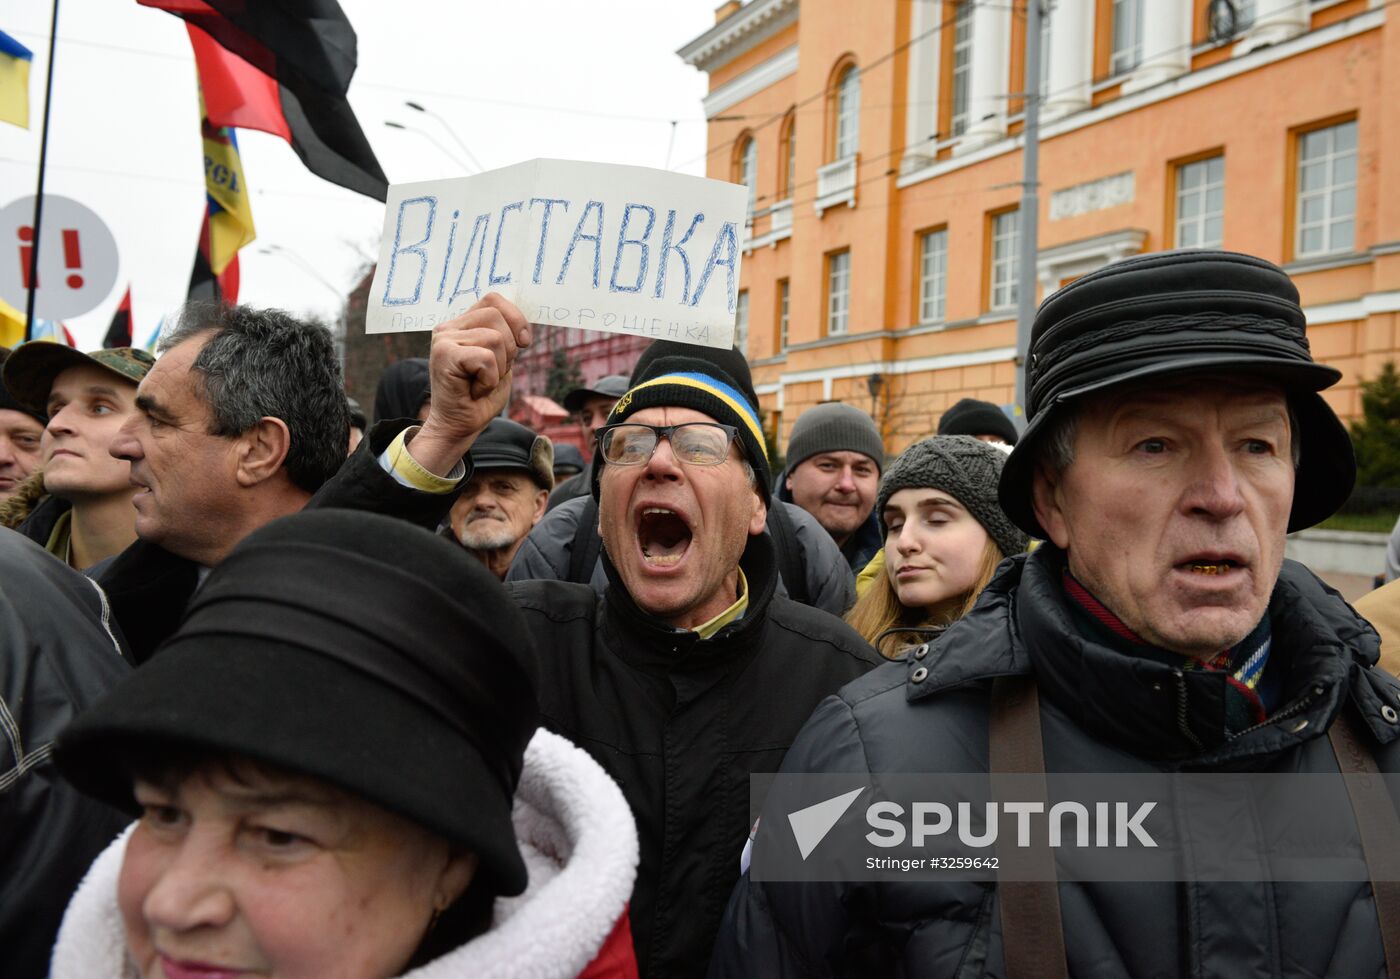 Mikheil Saakashvili supporters stage march in Kiev